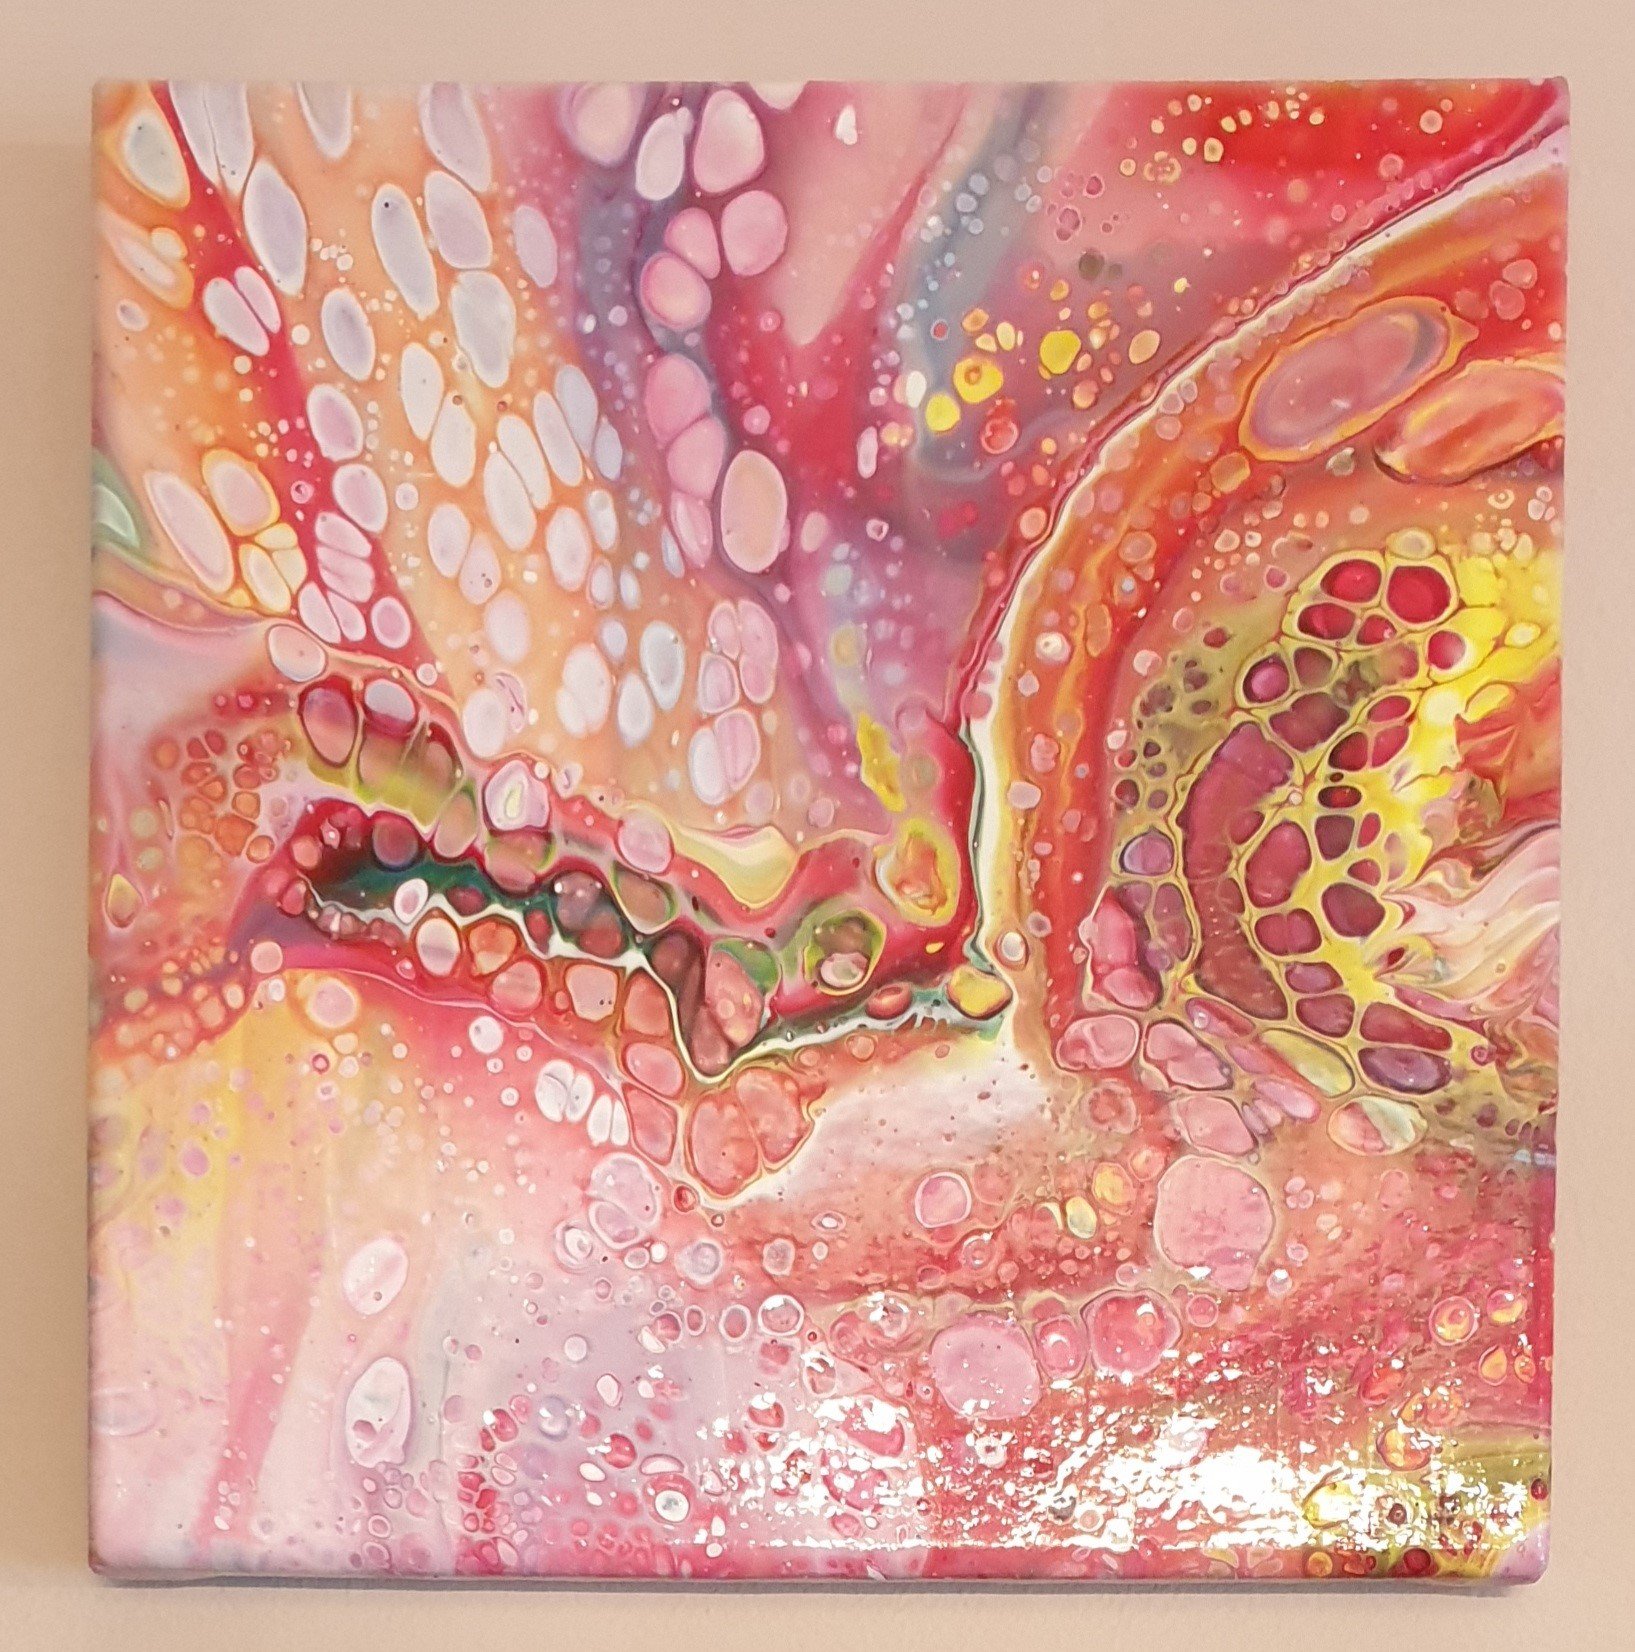 Acrylic Pouring - Company In-Person Workshop